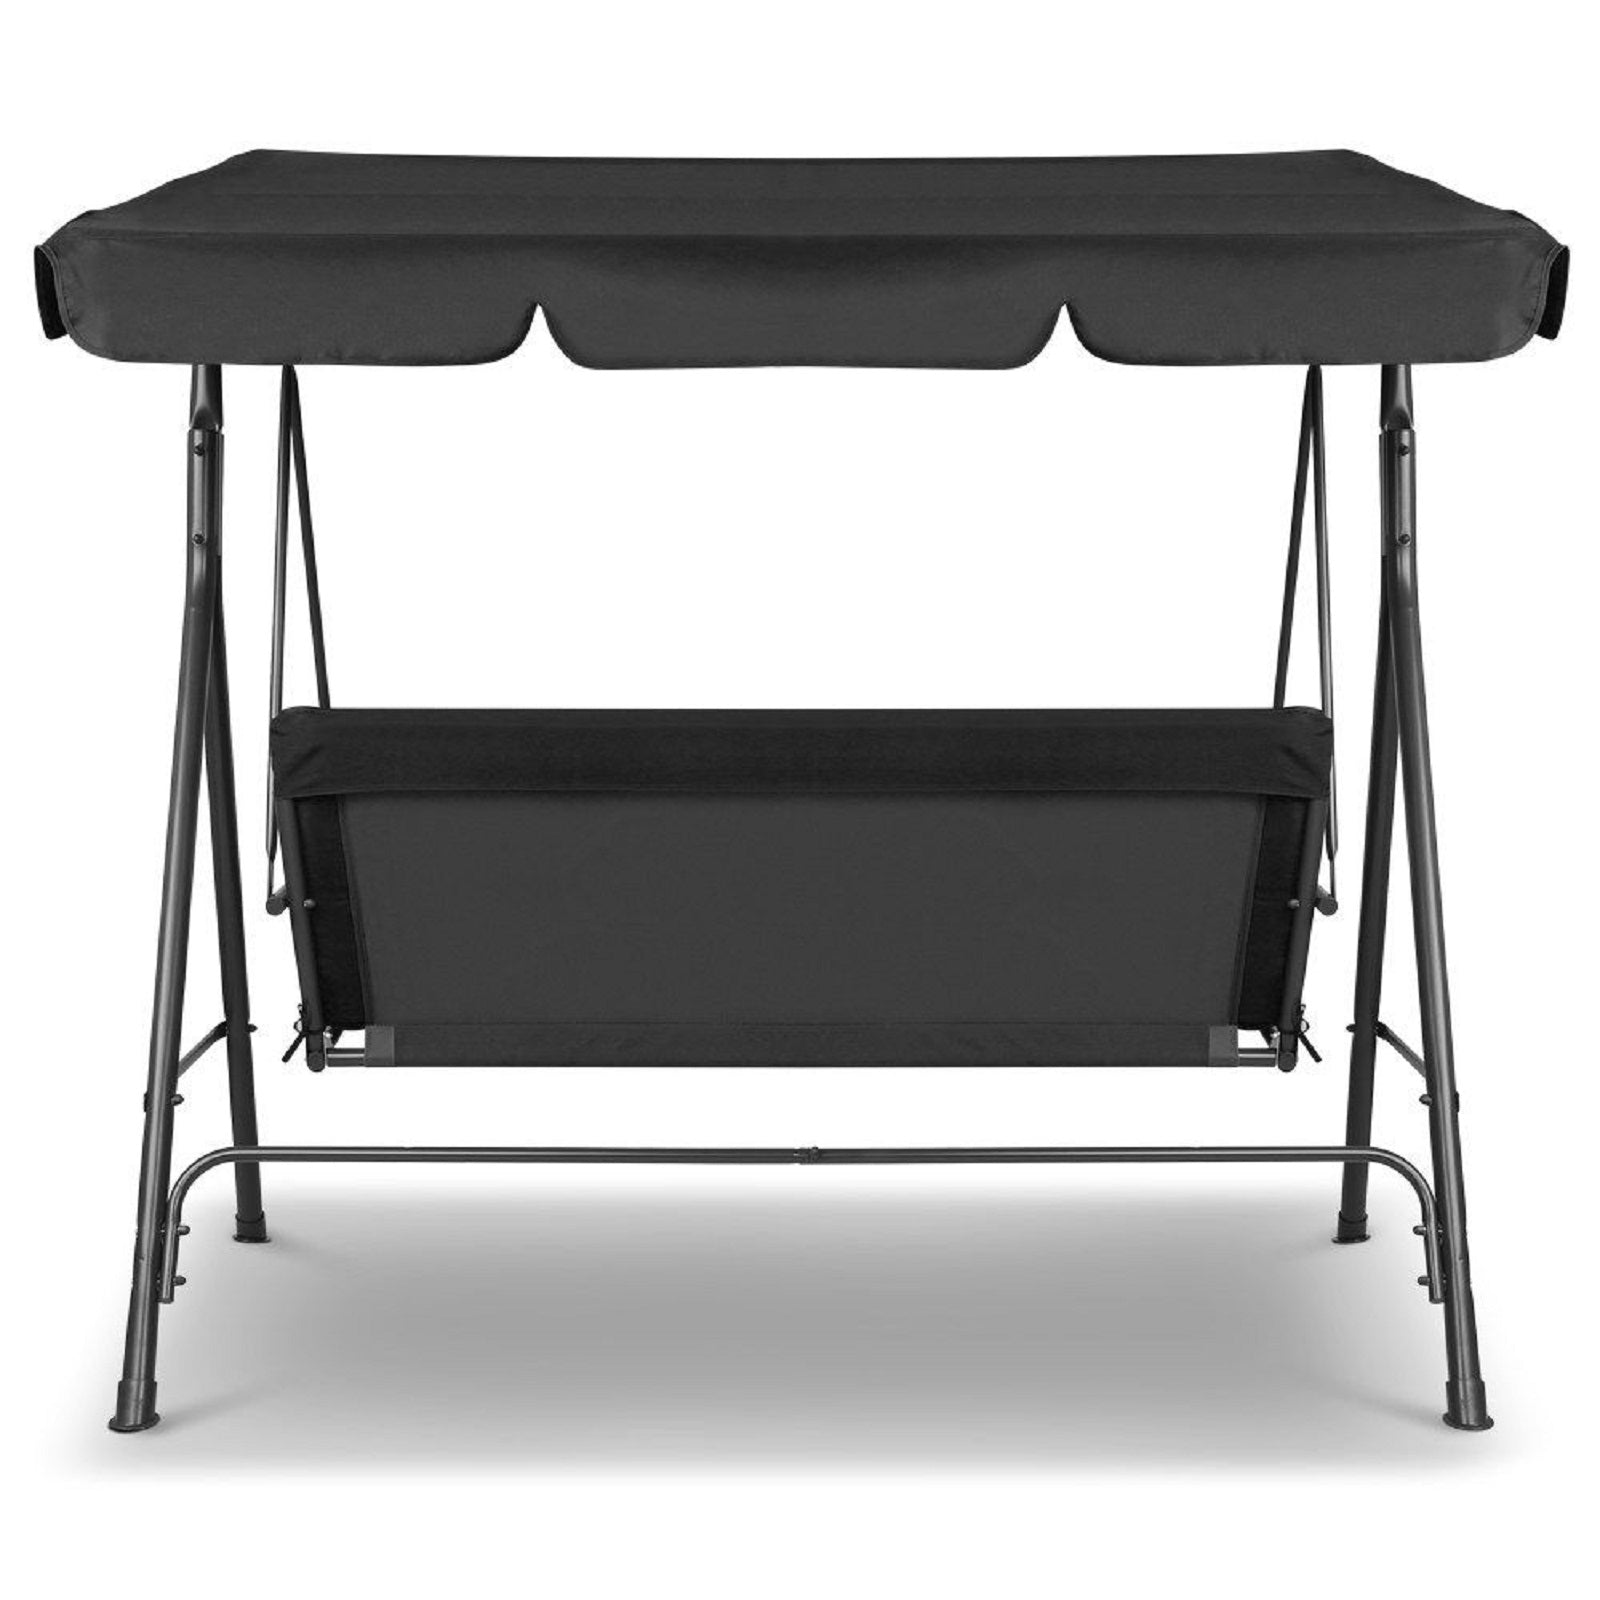 Milano Outdoor Swing Bench Seat Chair Canopy Furniture 3 Seater Garden Hammock - Black - image5